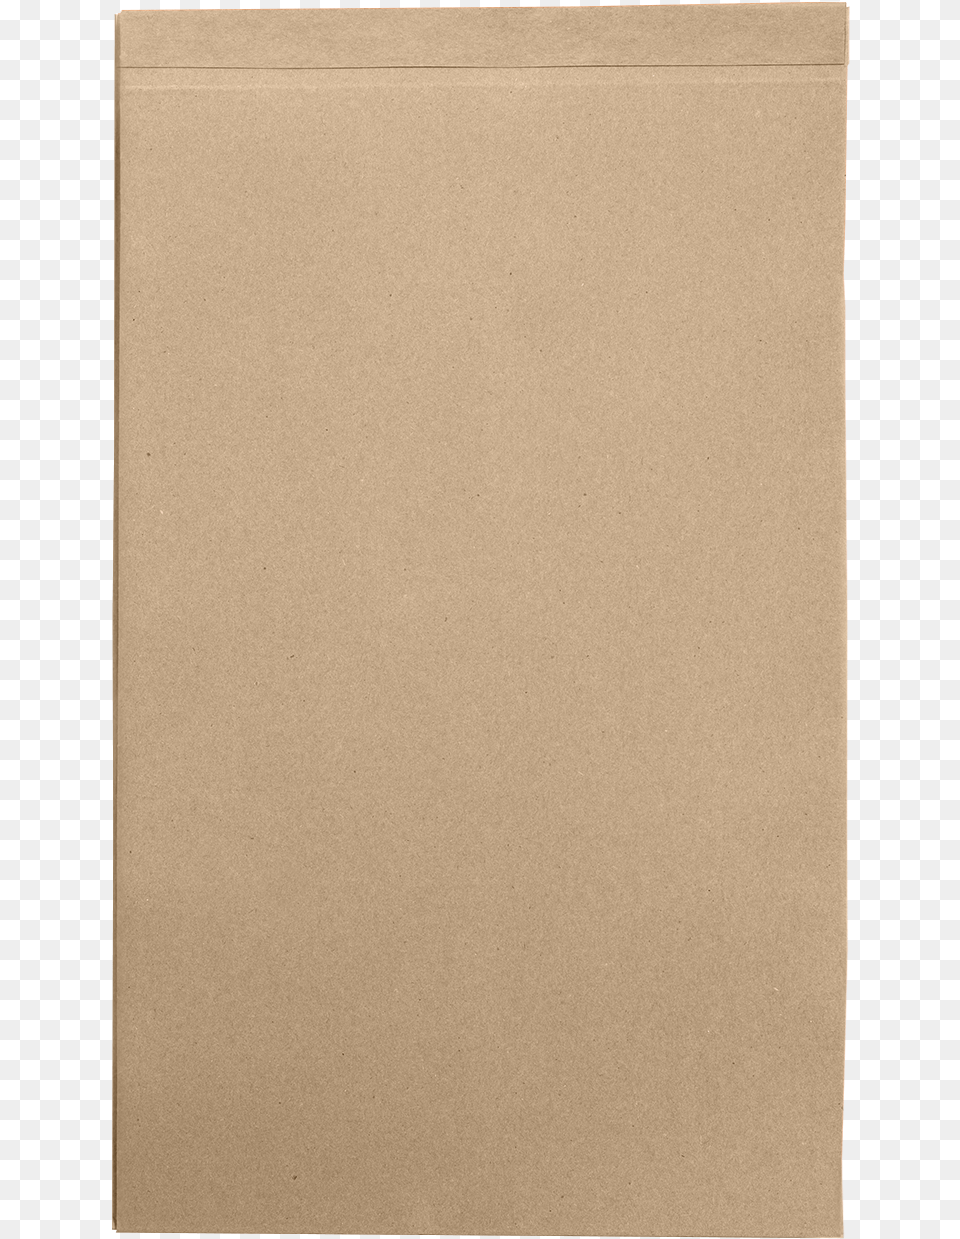 Construction Paper, Cardboard, Texture Png Image